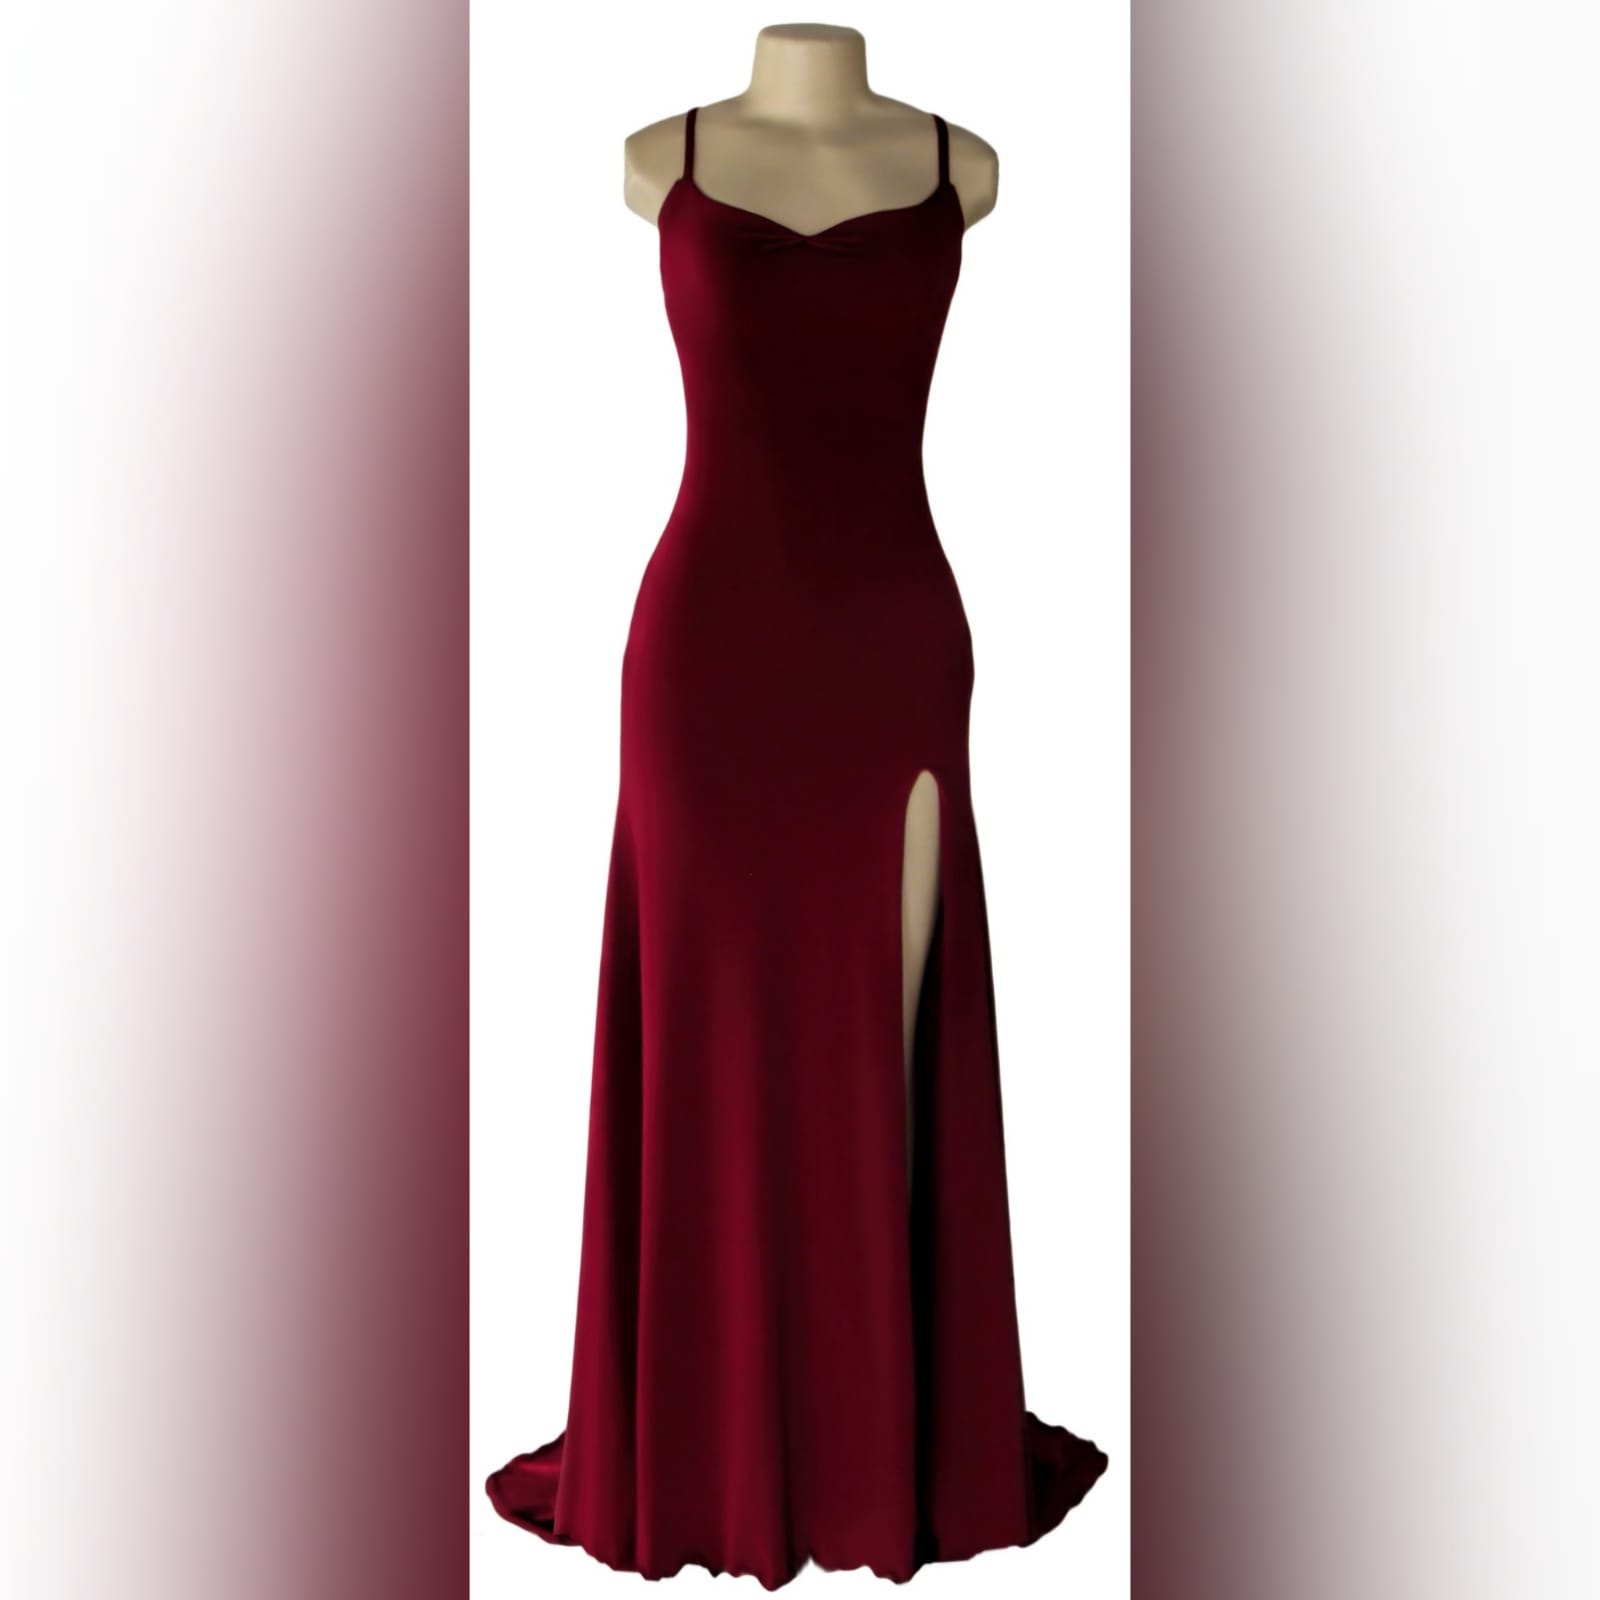 Maroon lace-up back long simple prom dress 4 maroon lace-up back long simple prom dress with thin shoulder straps, high slit and a small train. Lace-up back to adjust the fit.